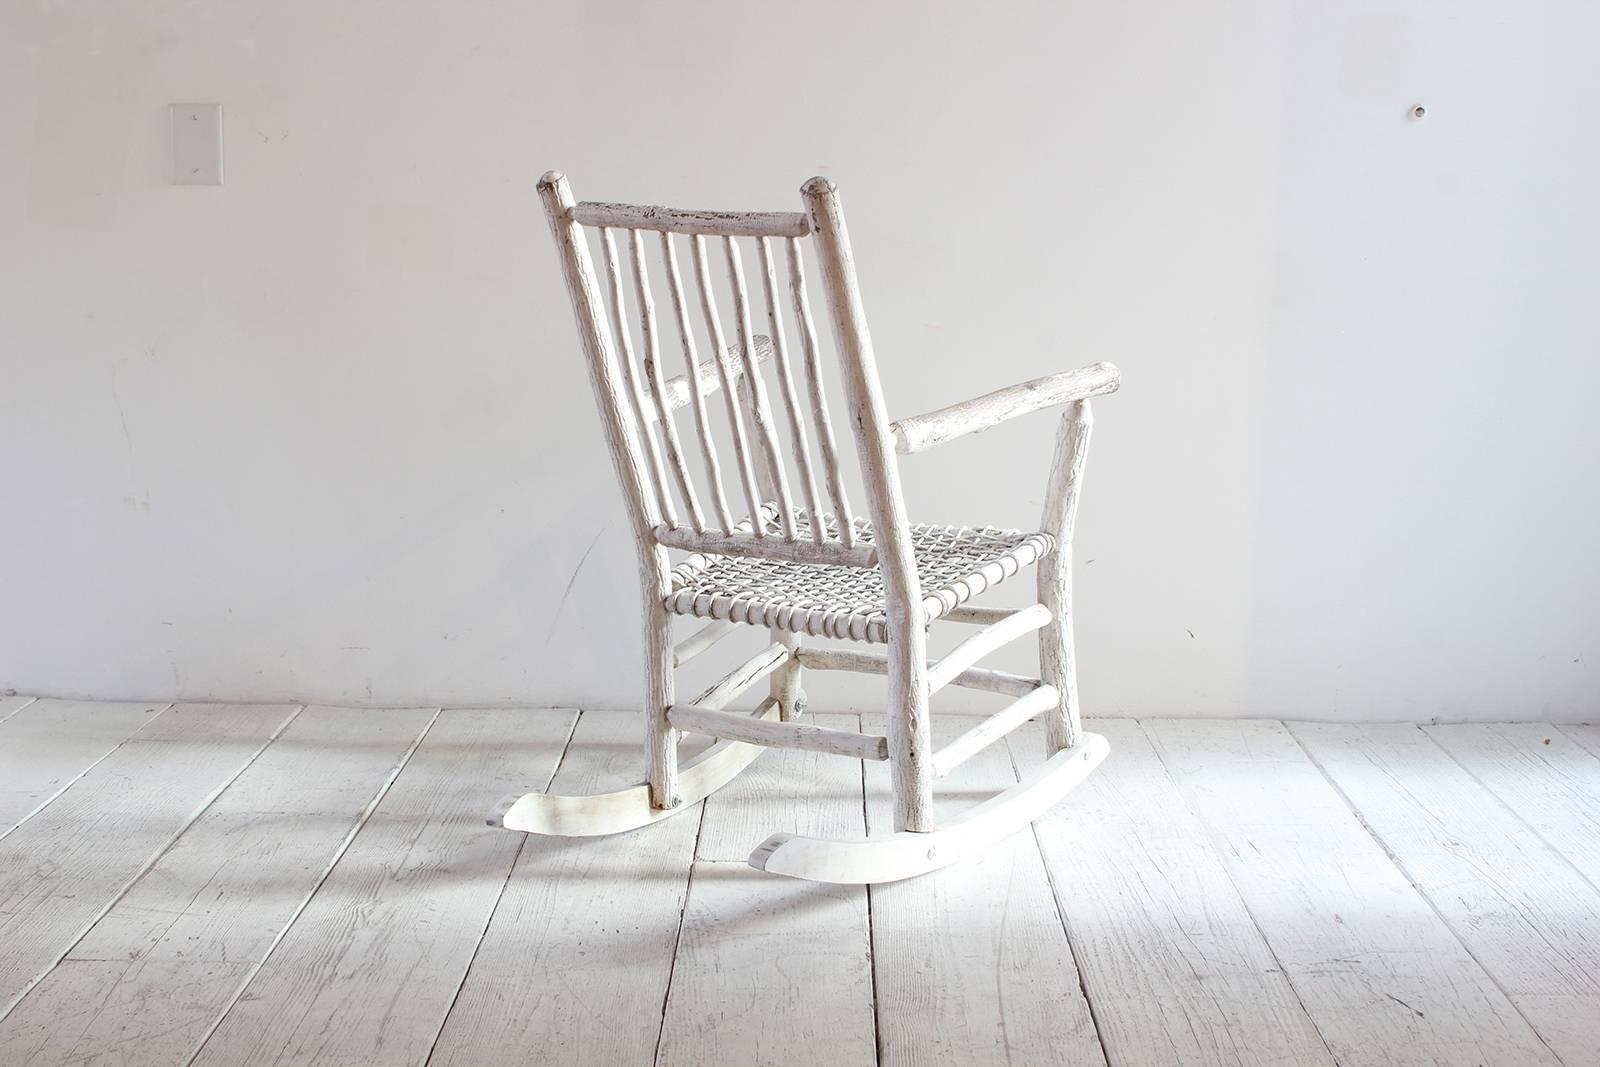 Wood painted rocking chair with rope seat.